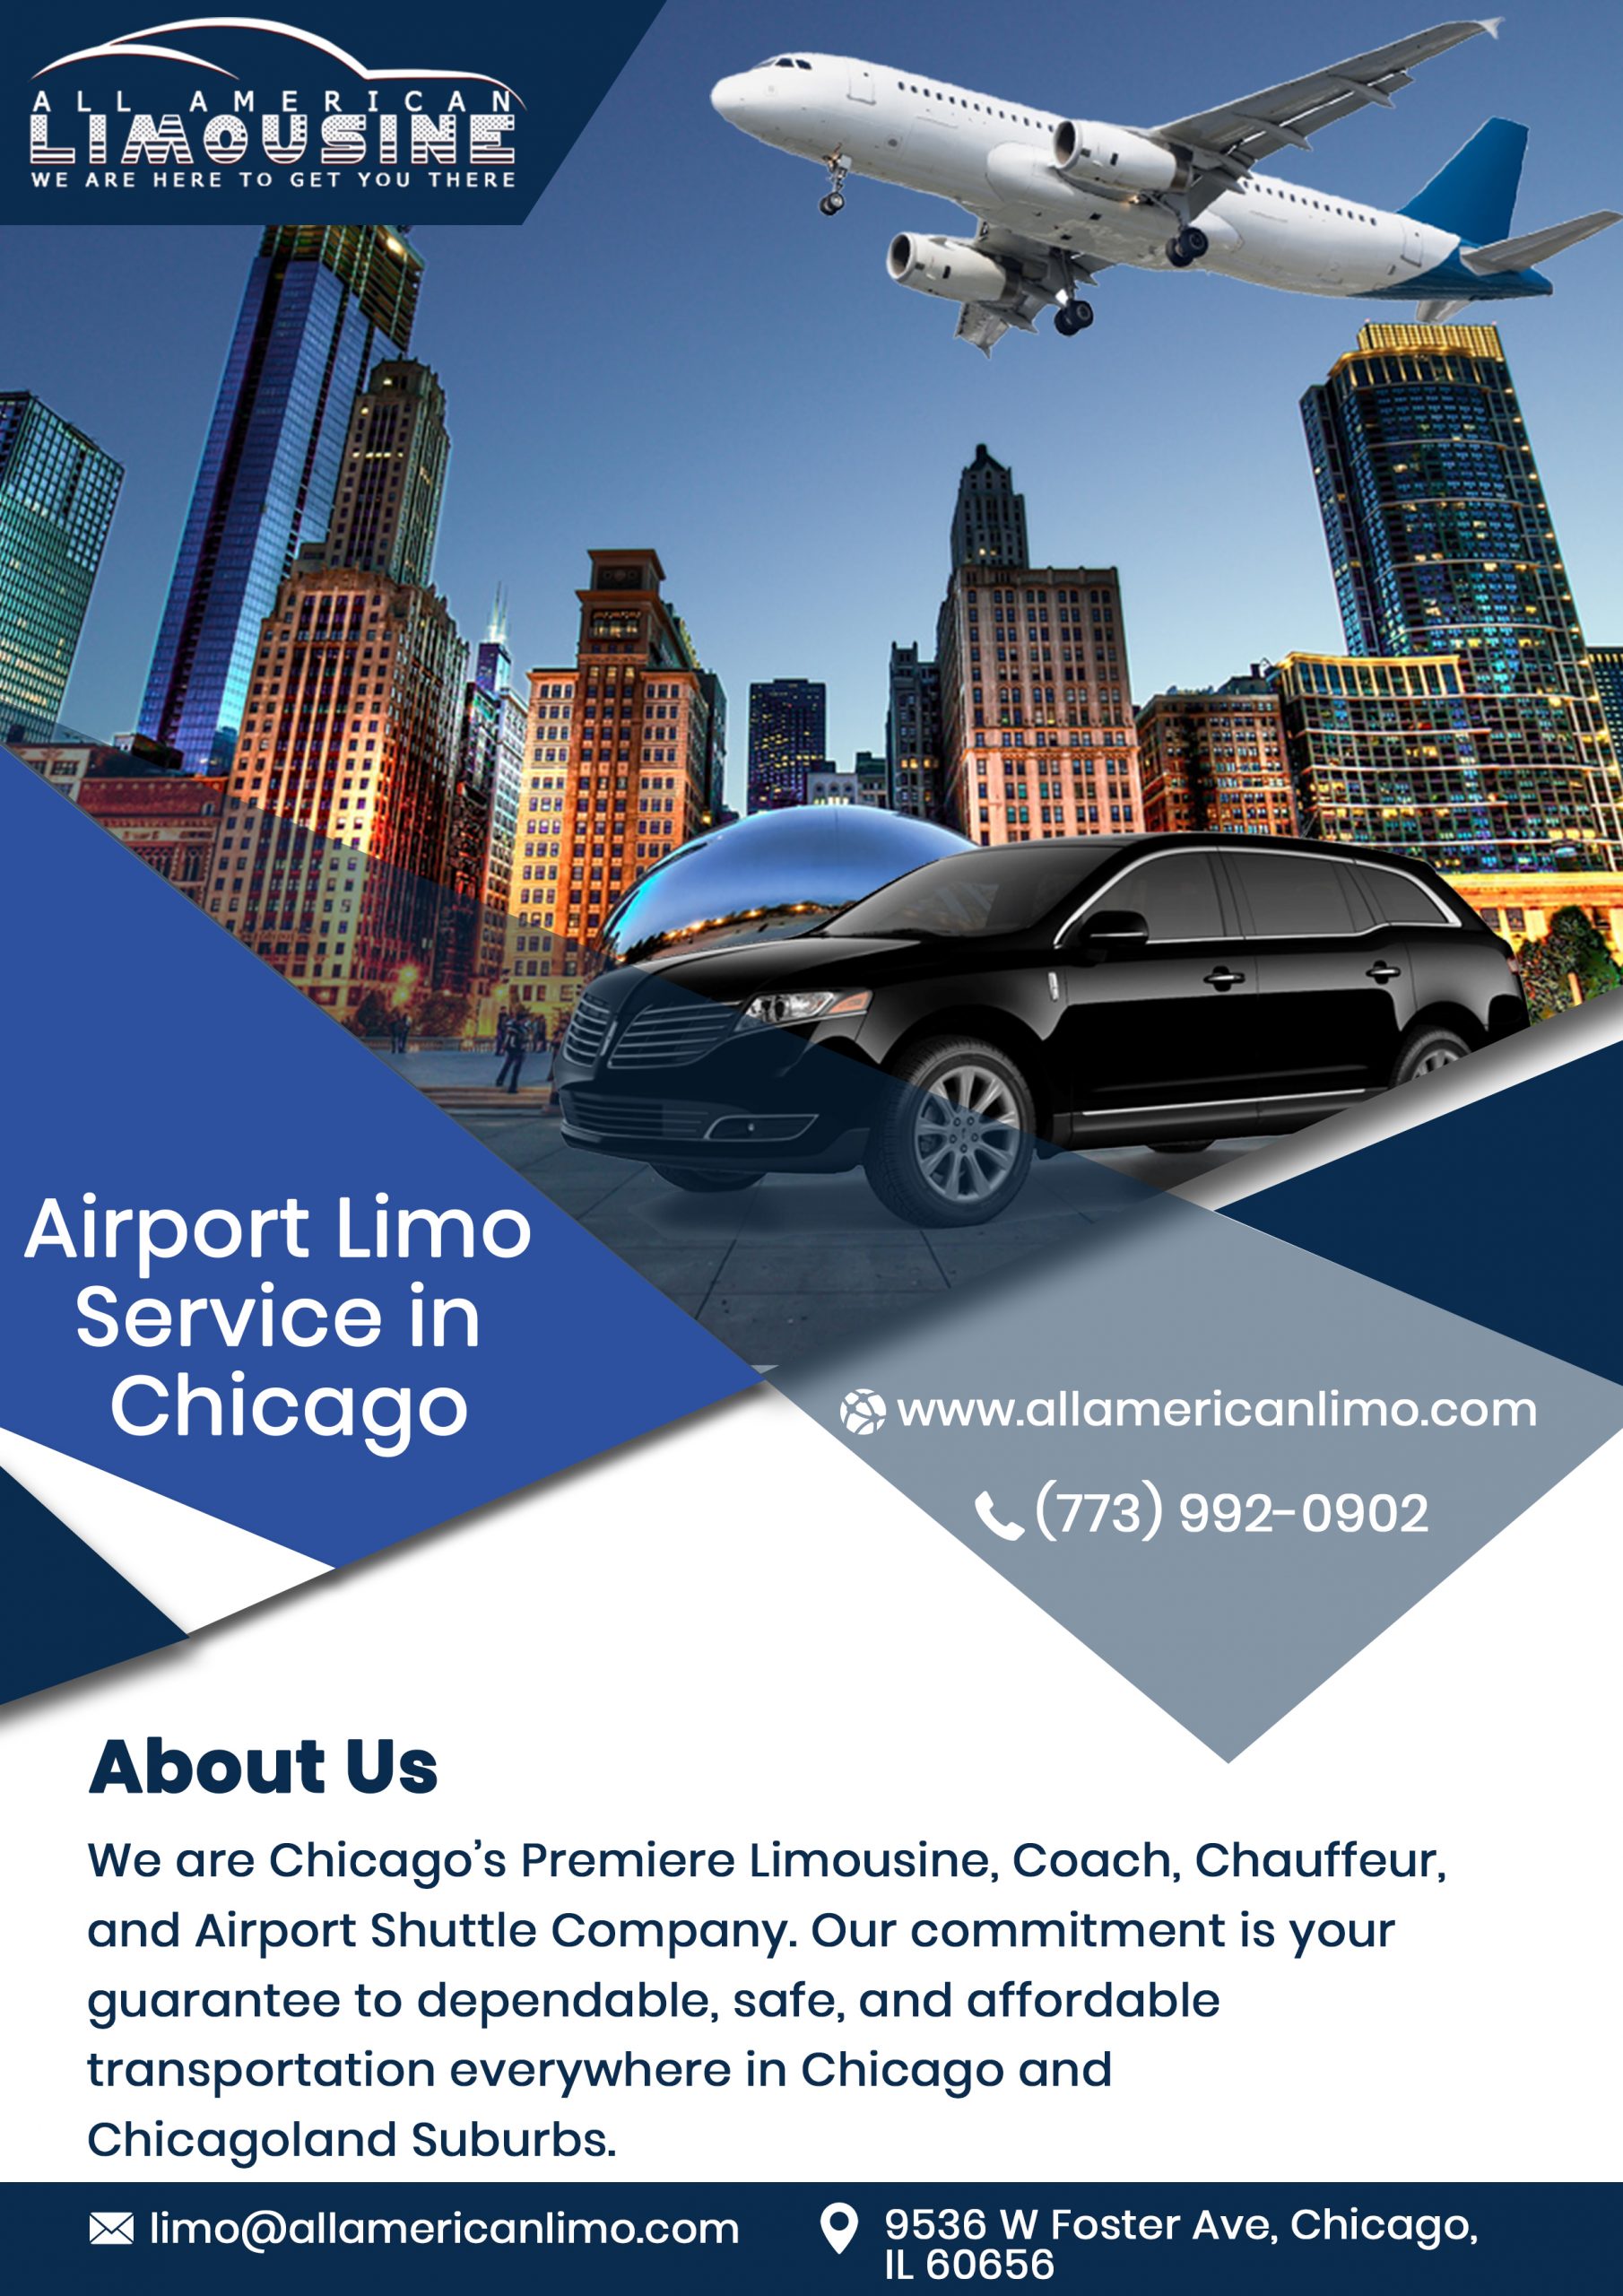 Chicago Car Service Near Me 60618, Party Bus 60618, Mercedes Sprinter Limo to 60618, Chicago Limo 60618, Limo Service 60618 to Airport, Hire, Rent, Get, Find, Car Service 60618 to Airport, Transportation Service 60618 to O'Hare, Corporate Travel 60618, Airport Travel 60618